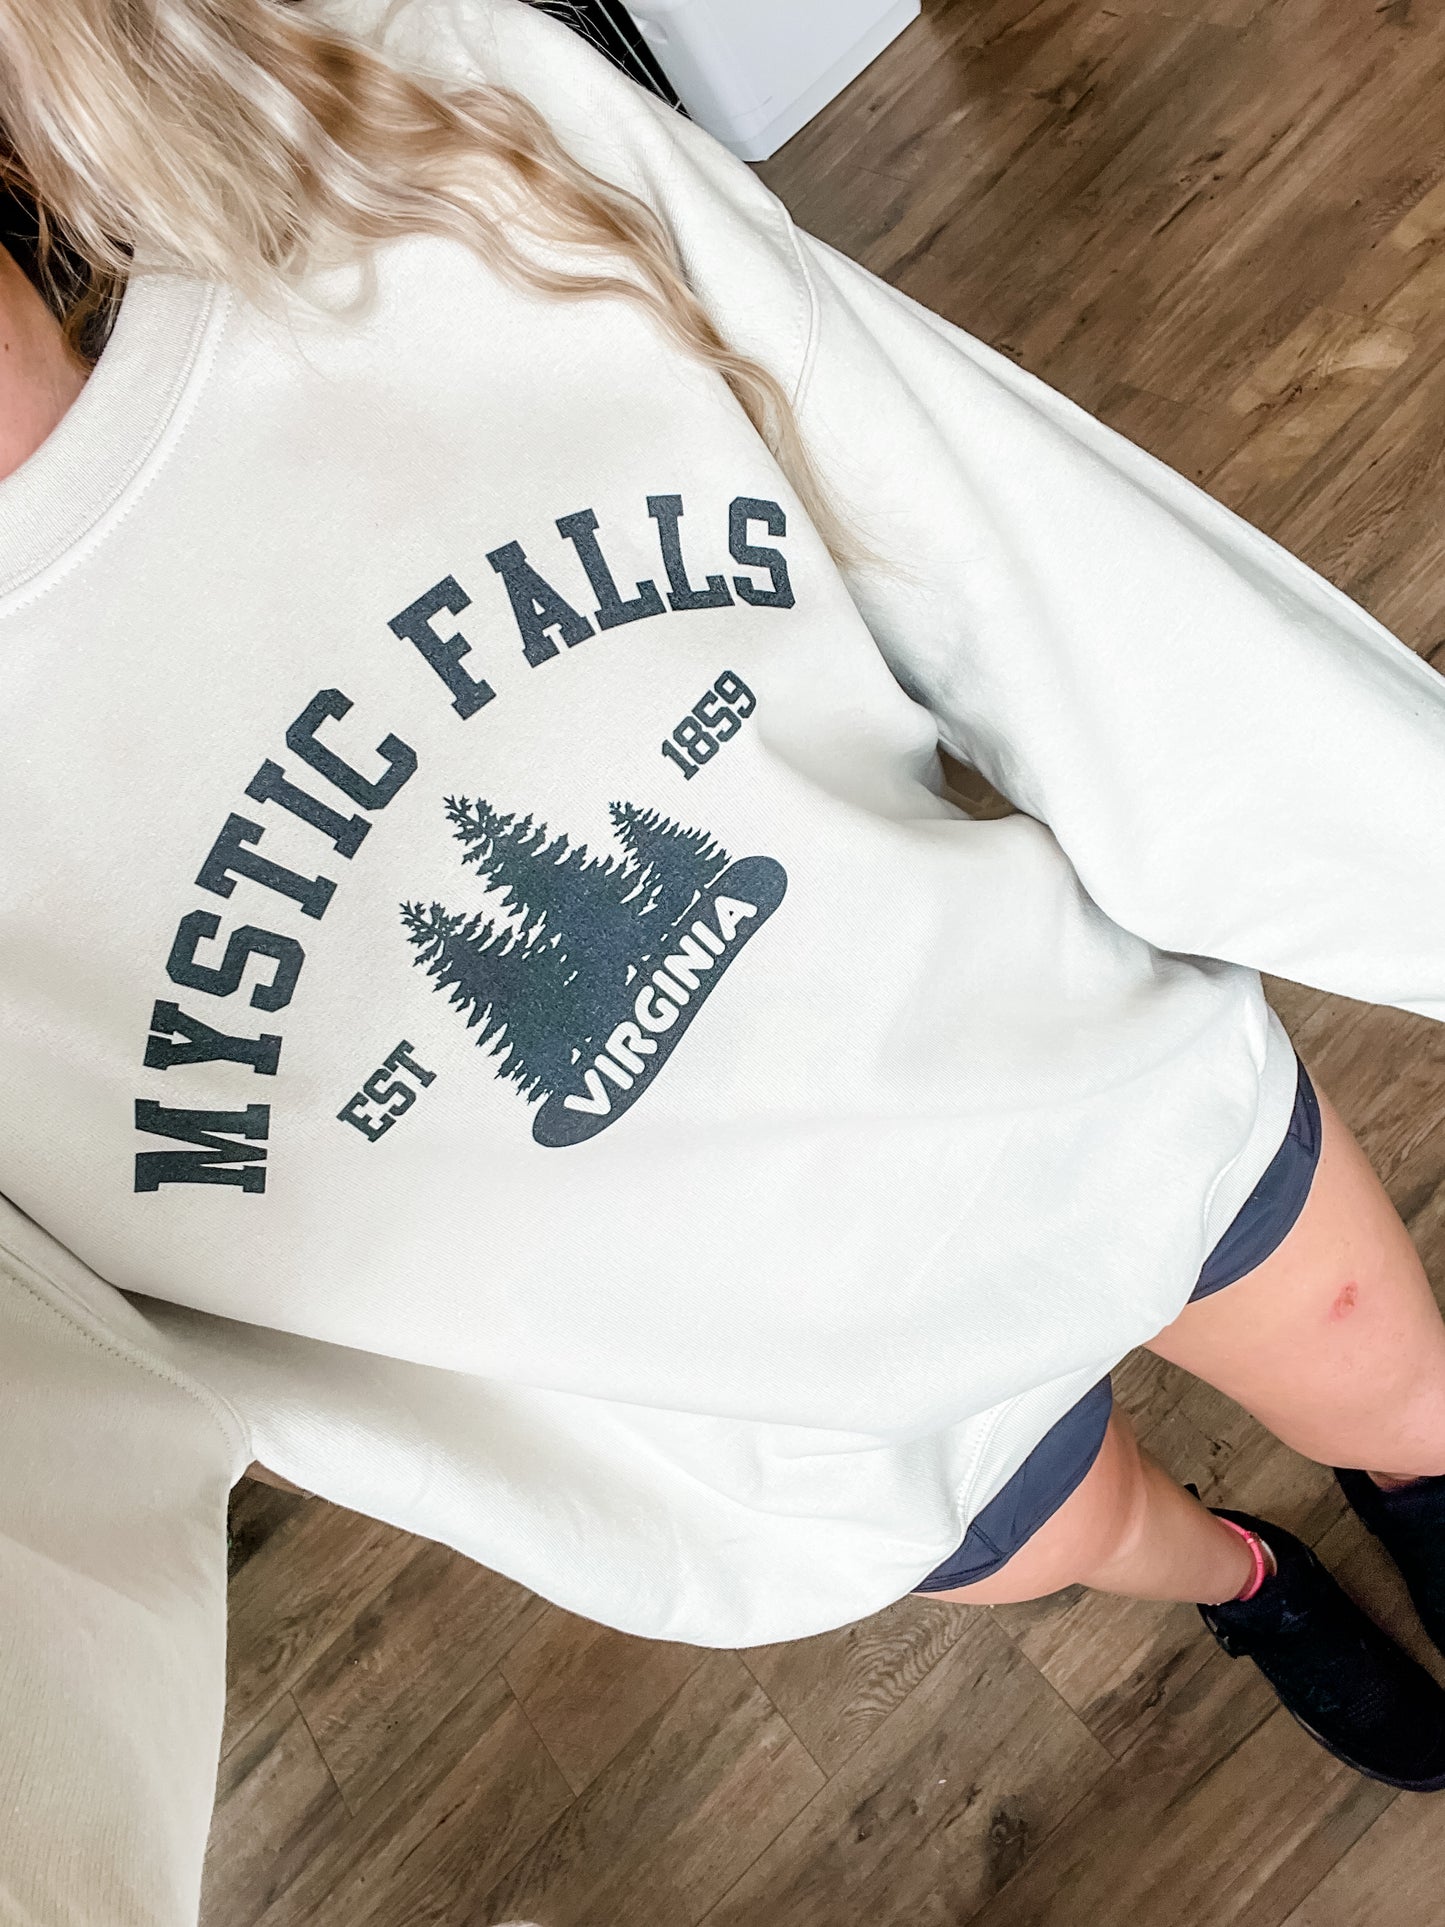 Mystic Falls | Pullover | Adult-Sister Shirts-Sister Shirts, Cute & Custom Tees for Mama & Littles in Trussville, Alabama.